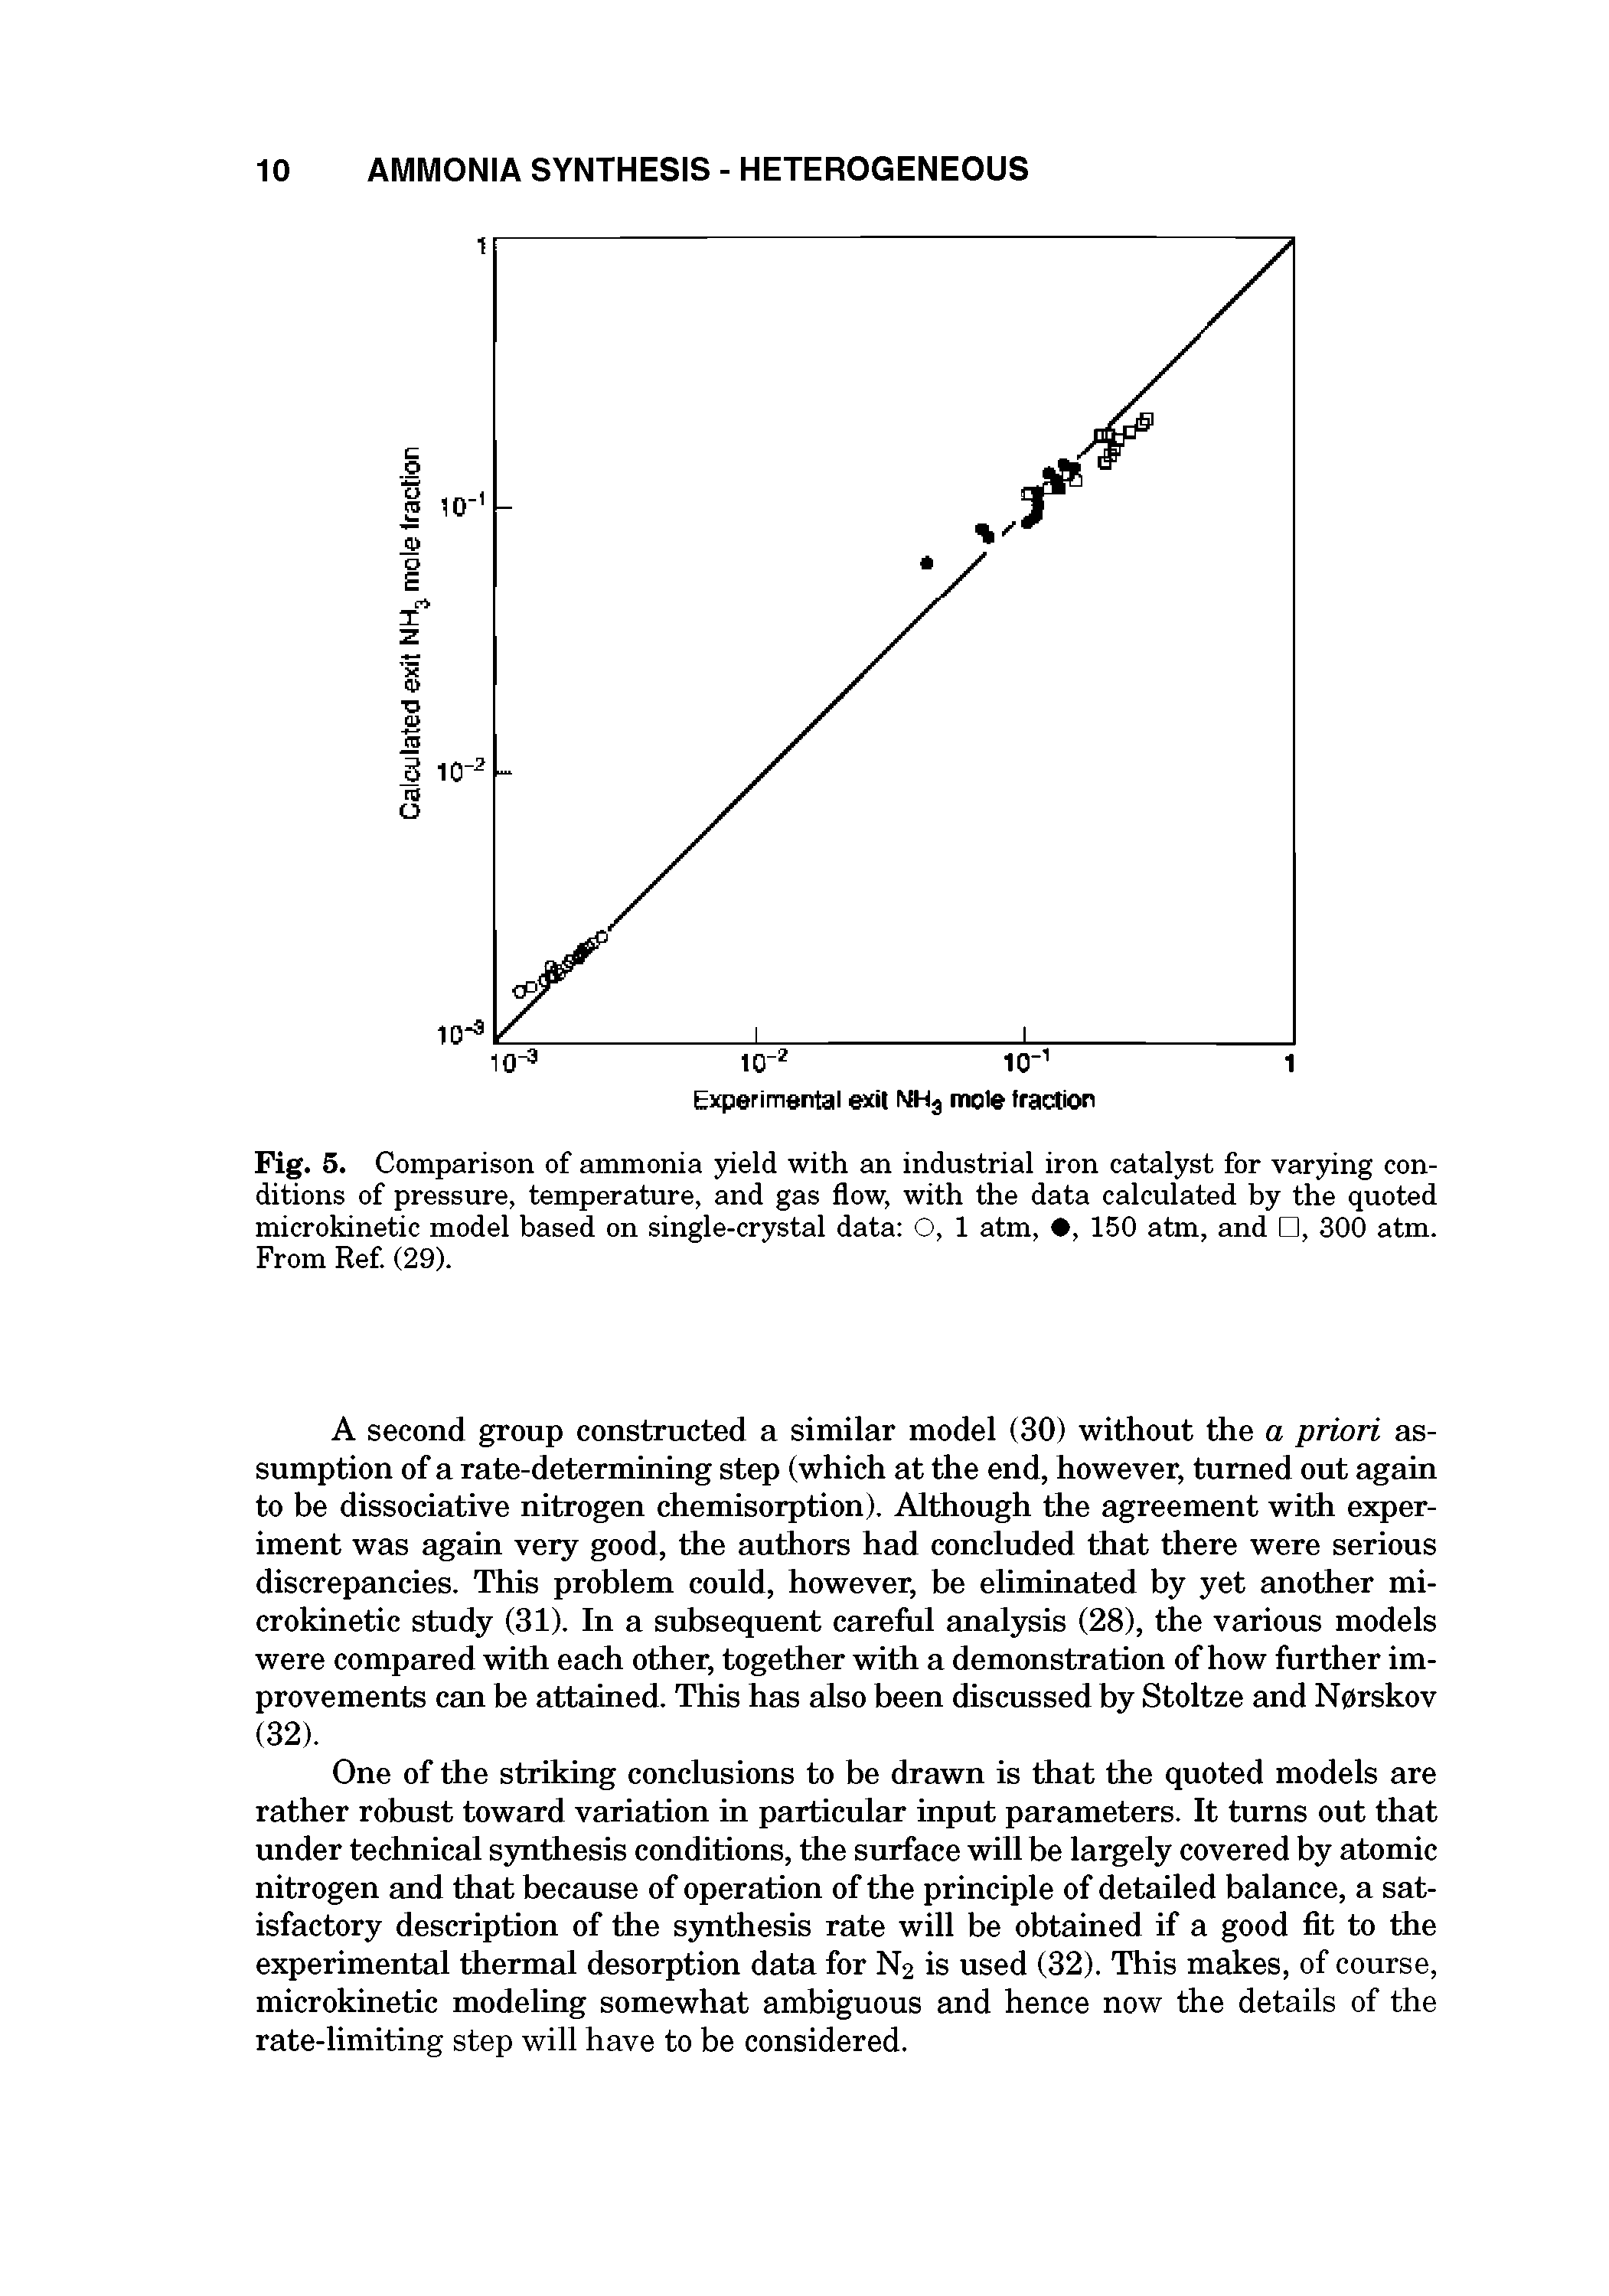 Fig. 5. Comparison of ammonia yield with an industrial iron catalyst for varying conditions of pressure, temperature, and gas flow, with the data calculated by the quoted microkinetic model based on single-crystal data O, 1 atm, , 150 atm, and , 300 atm. From Ref (29).